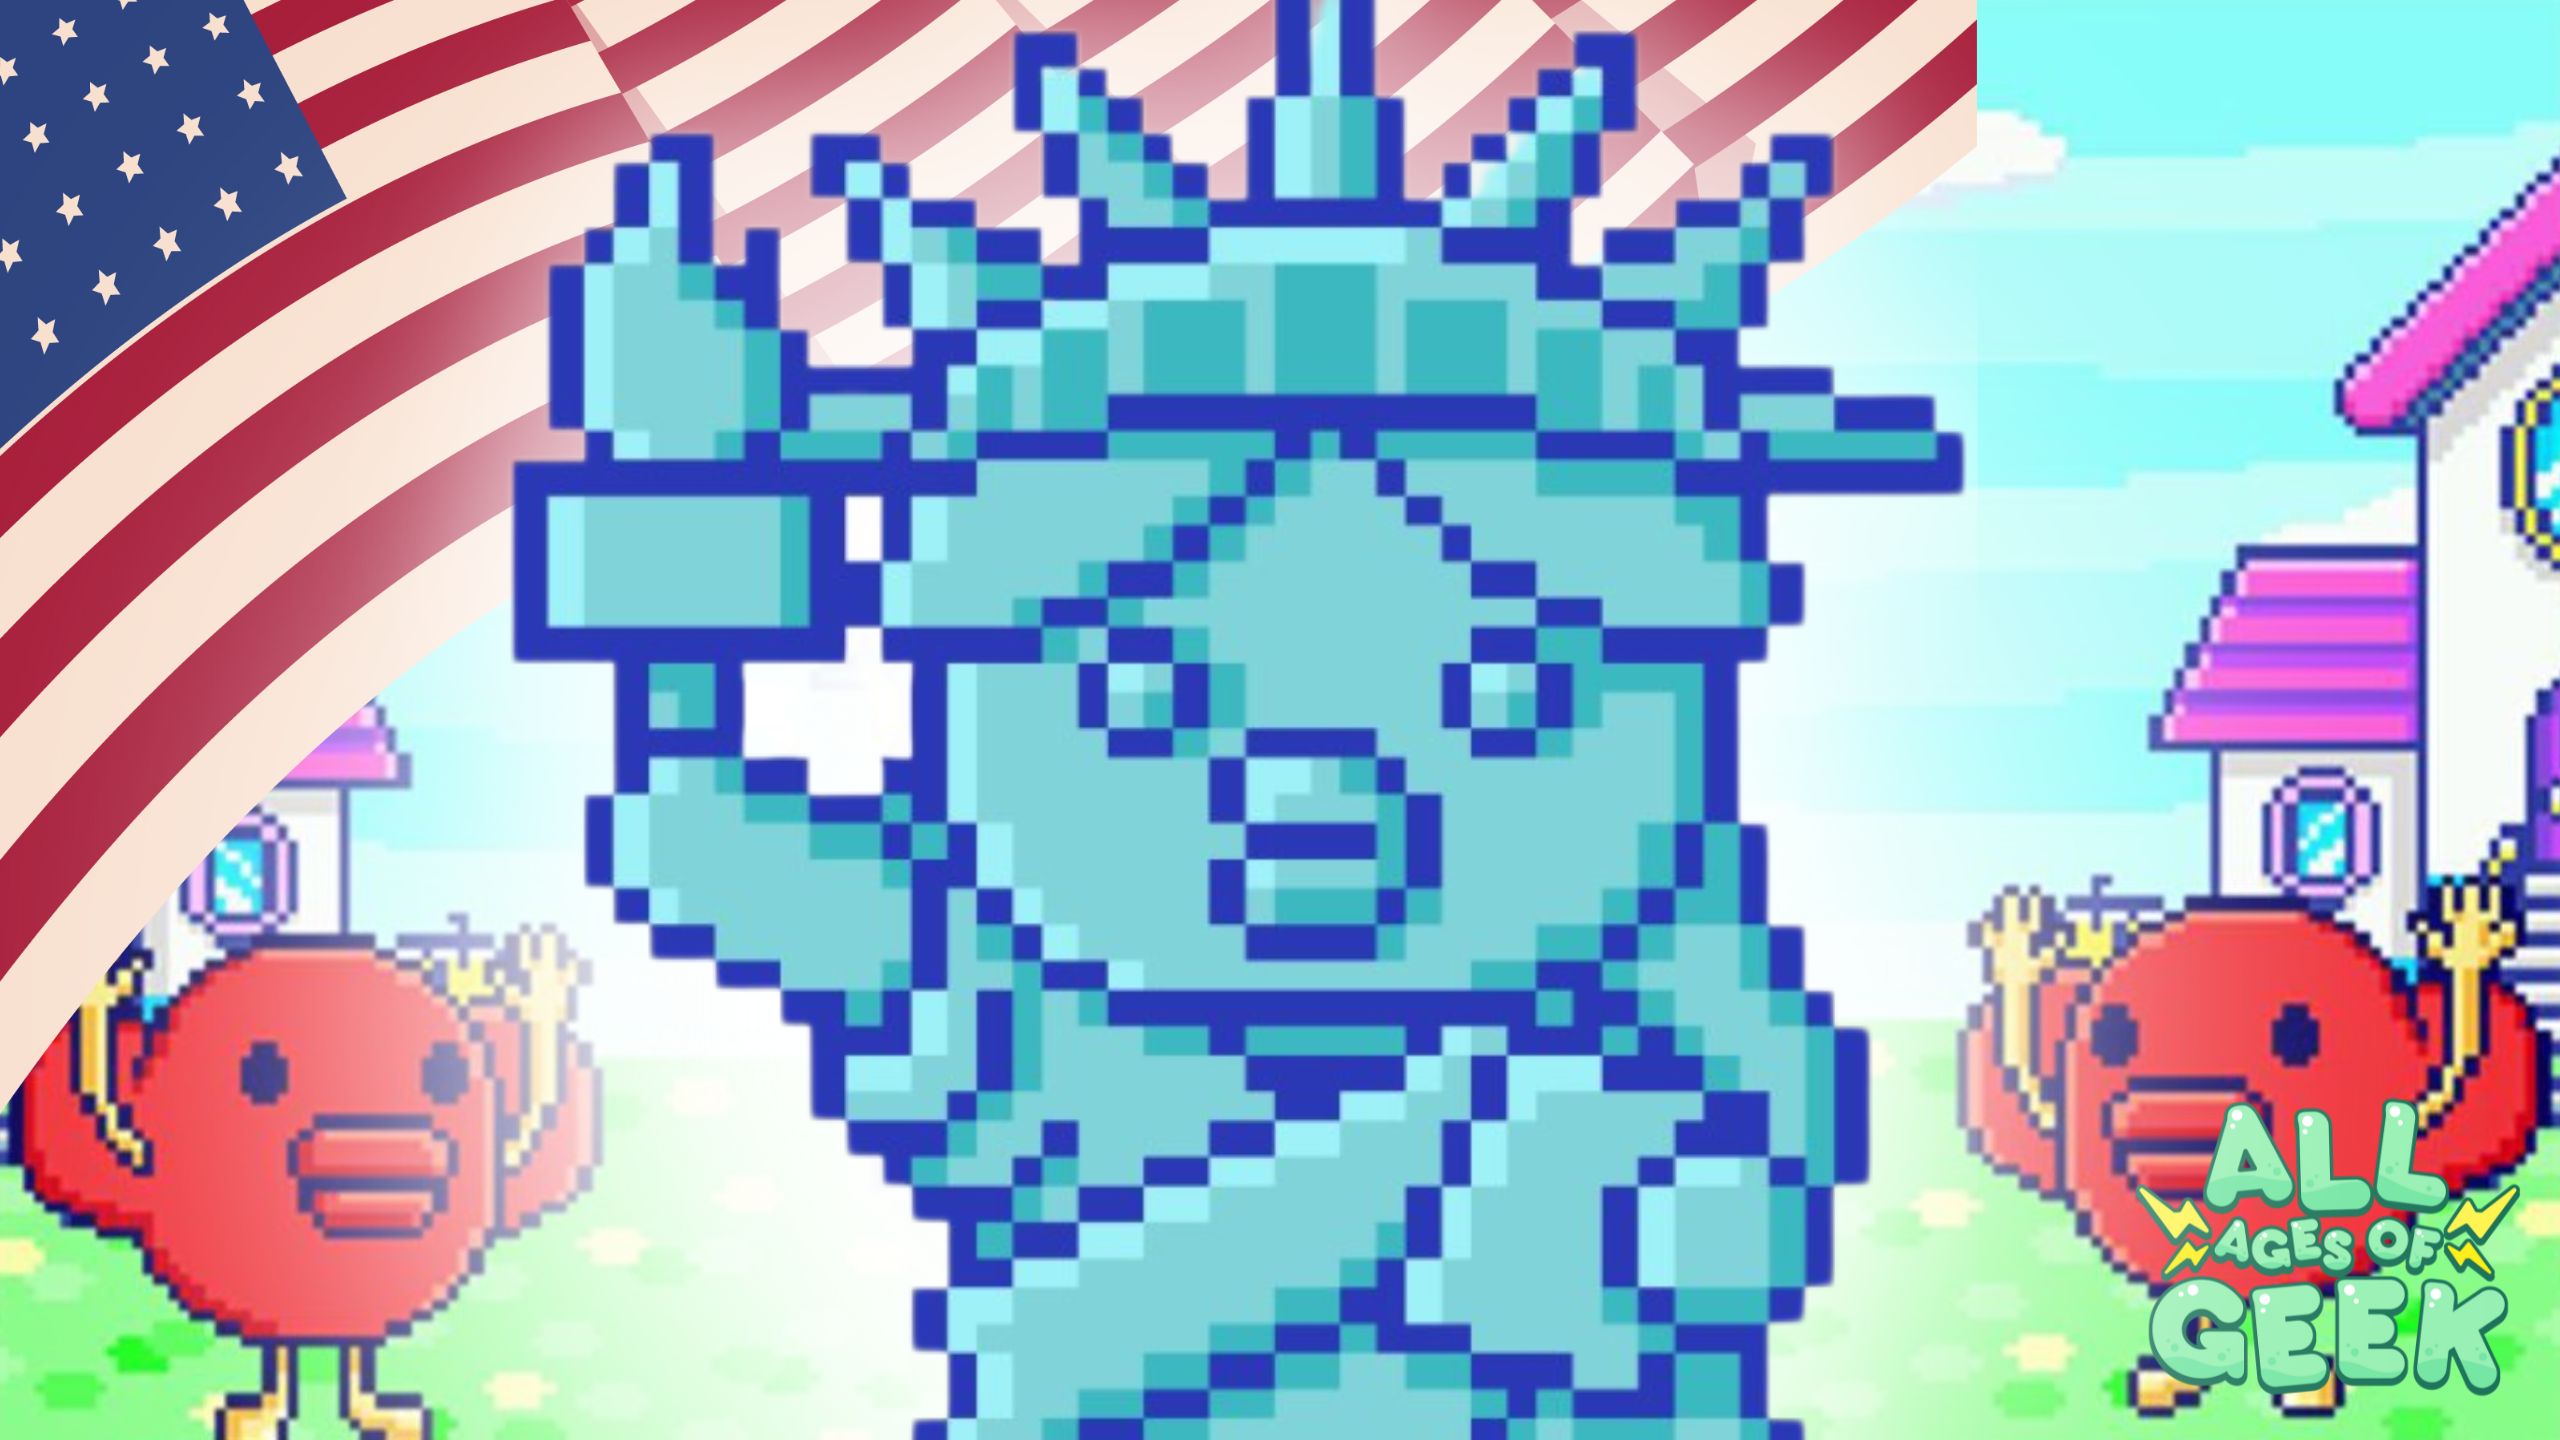 Pixel art image of a character resembling the Statue of Liberty, with an American flag background. The character is blue and holding a torch, standing in front of a colorful house. Two red bird-like creatures are cheering on either side. The All Ages of Geek logo is displayed in the bottom right corner.